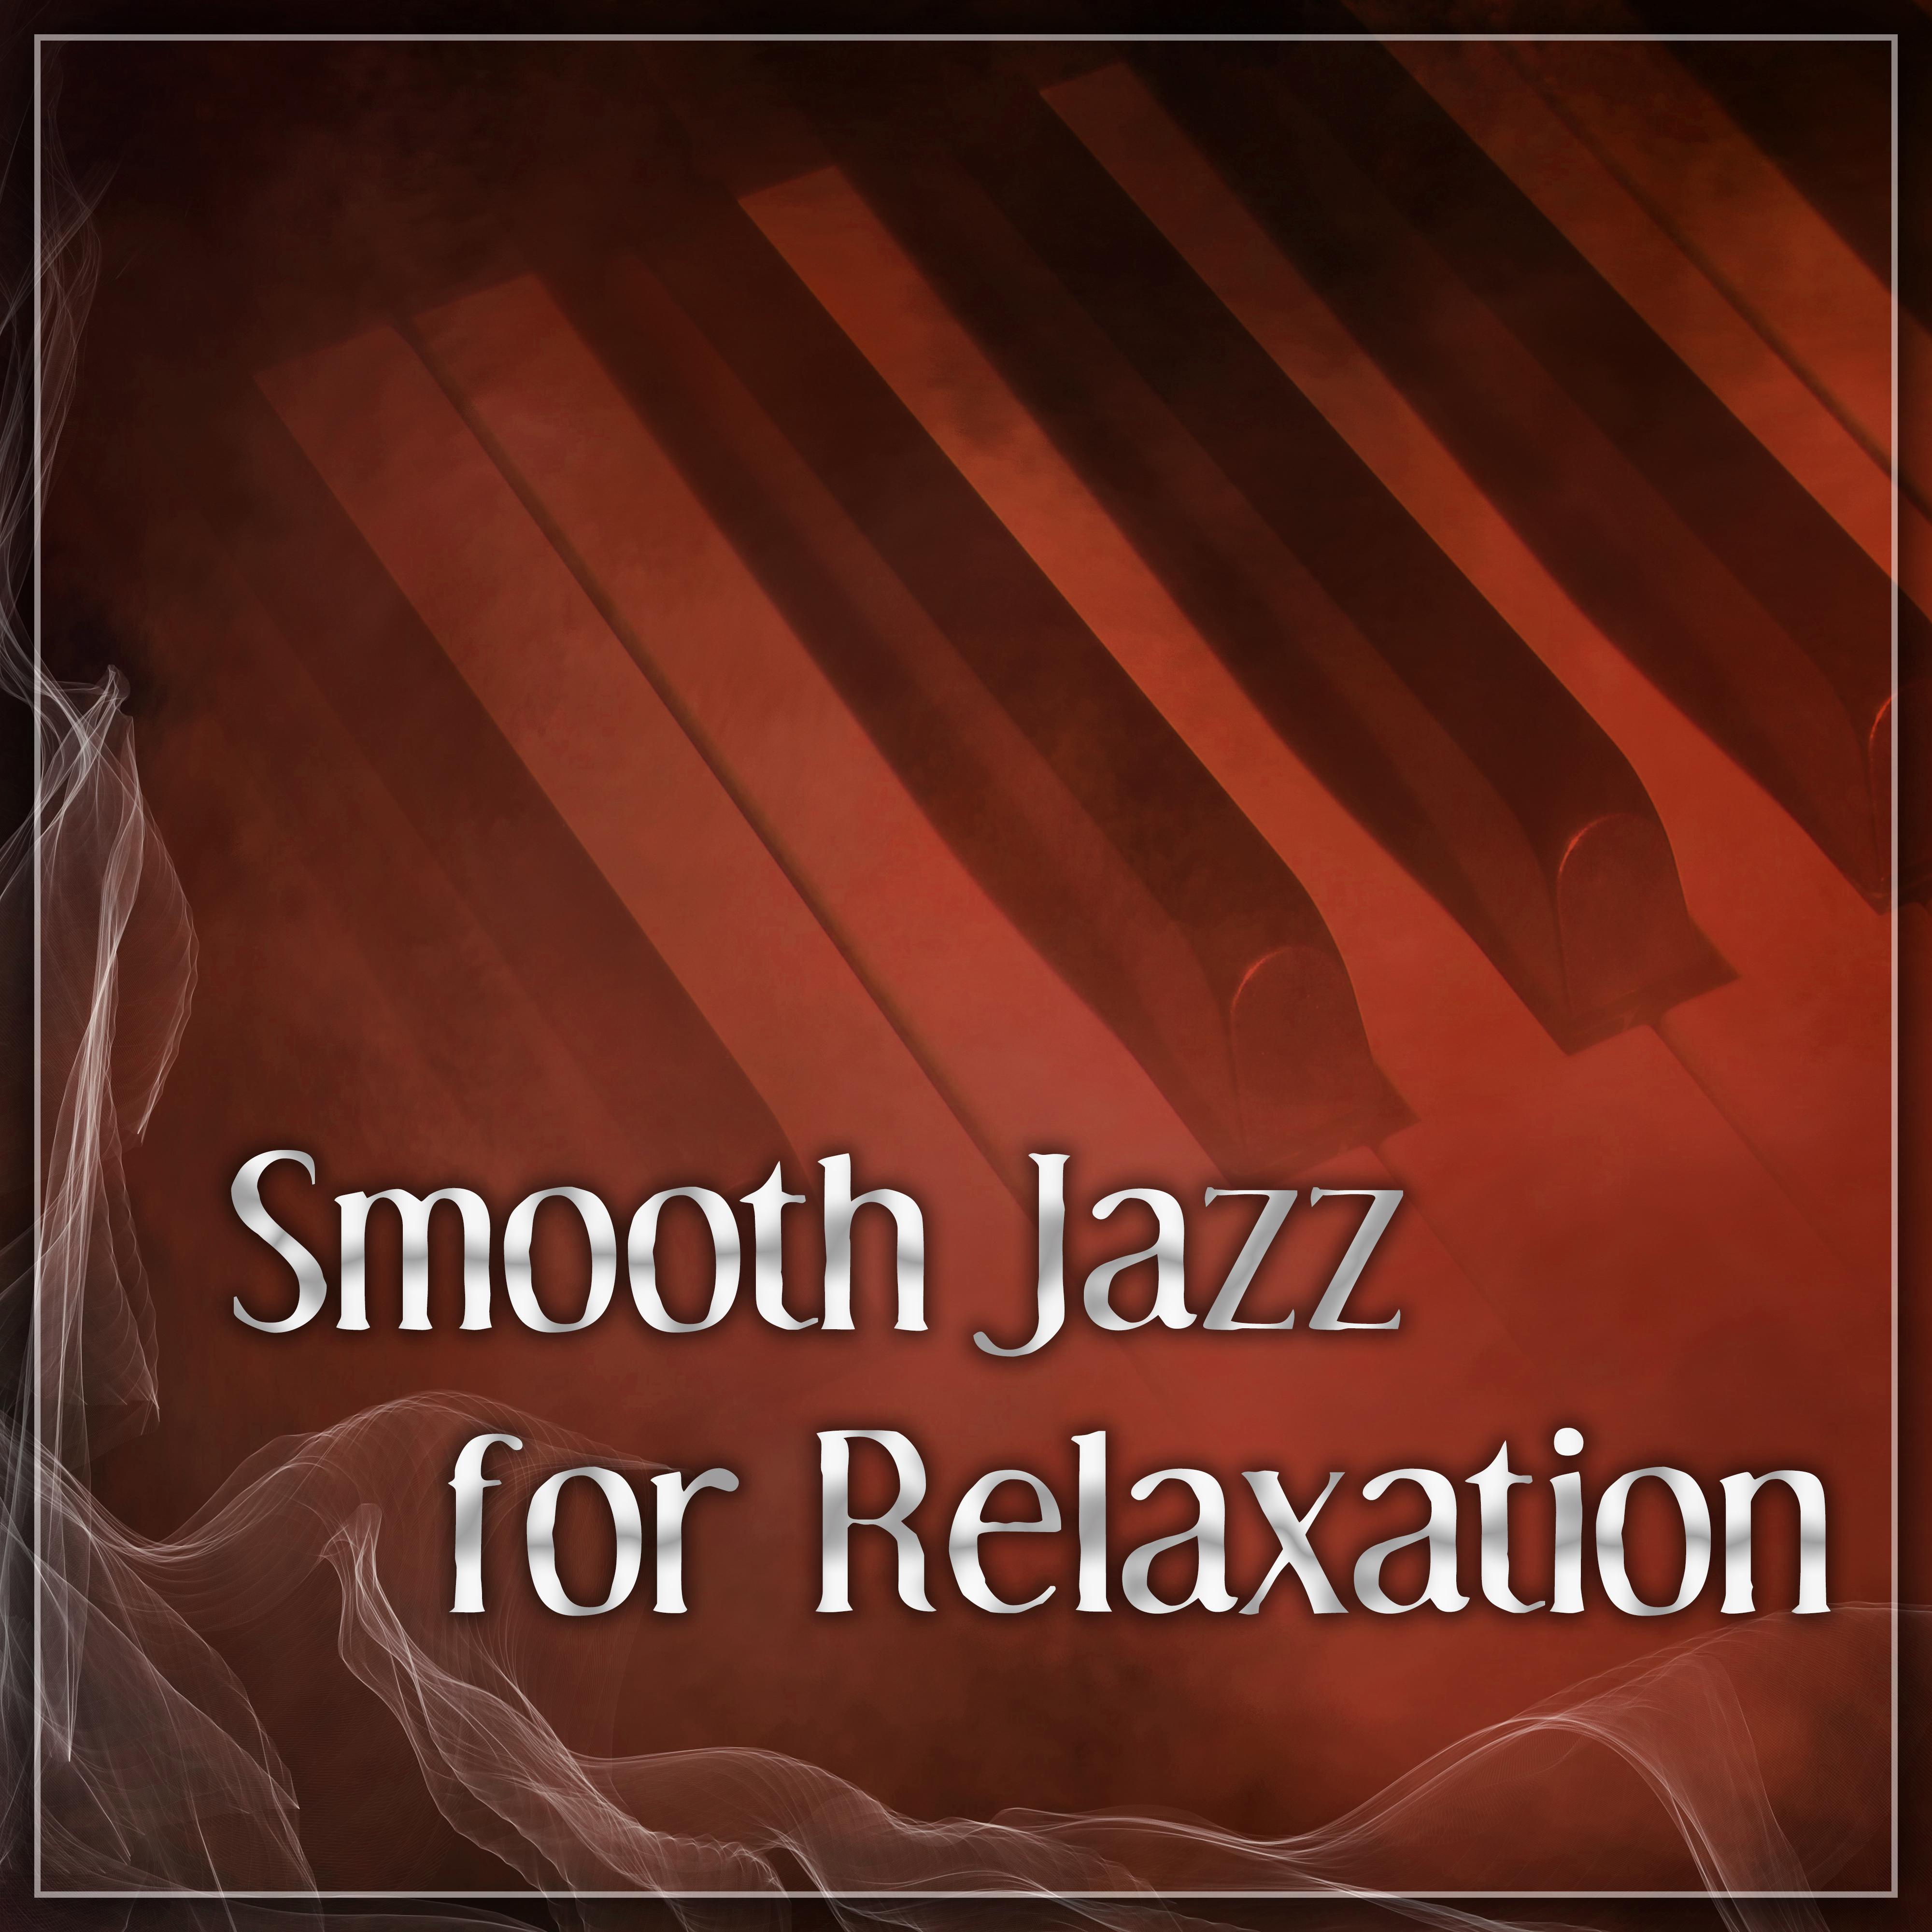 Smooth Jazz for Relaxation  Best Piano Jazz for Relaxation, Relax Yourself, Background Sounds to Calm Down